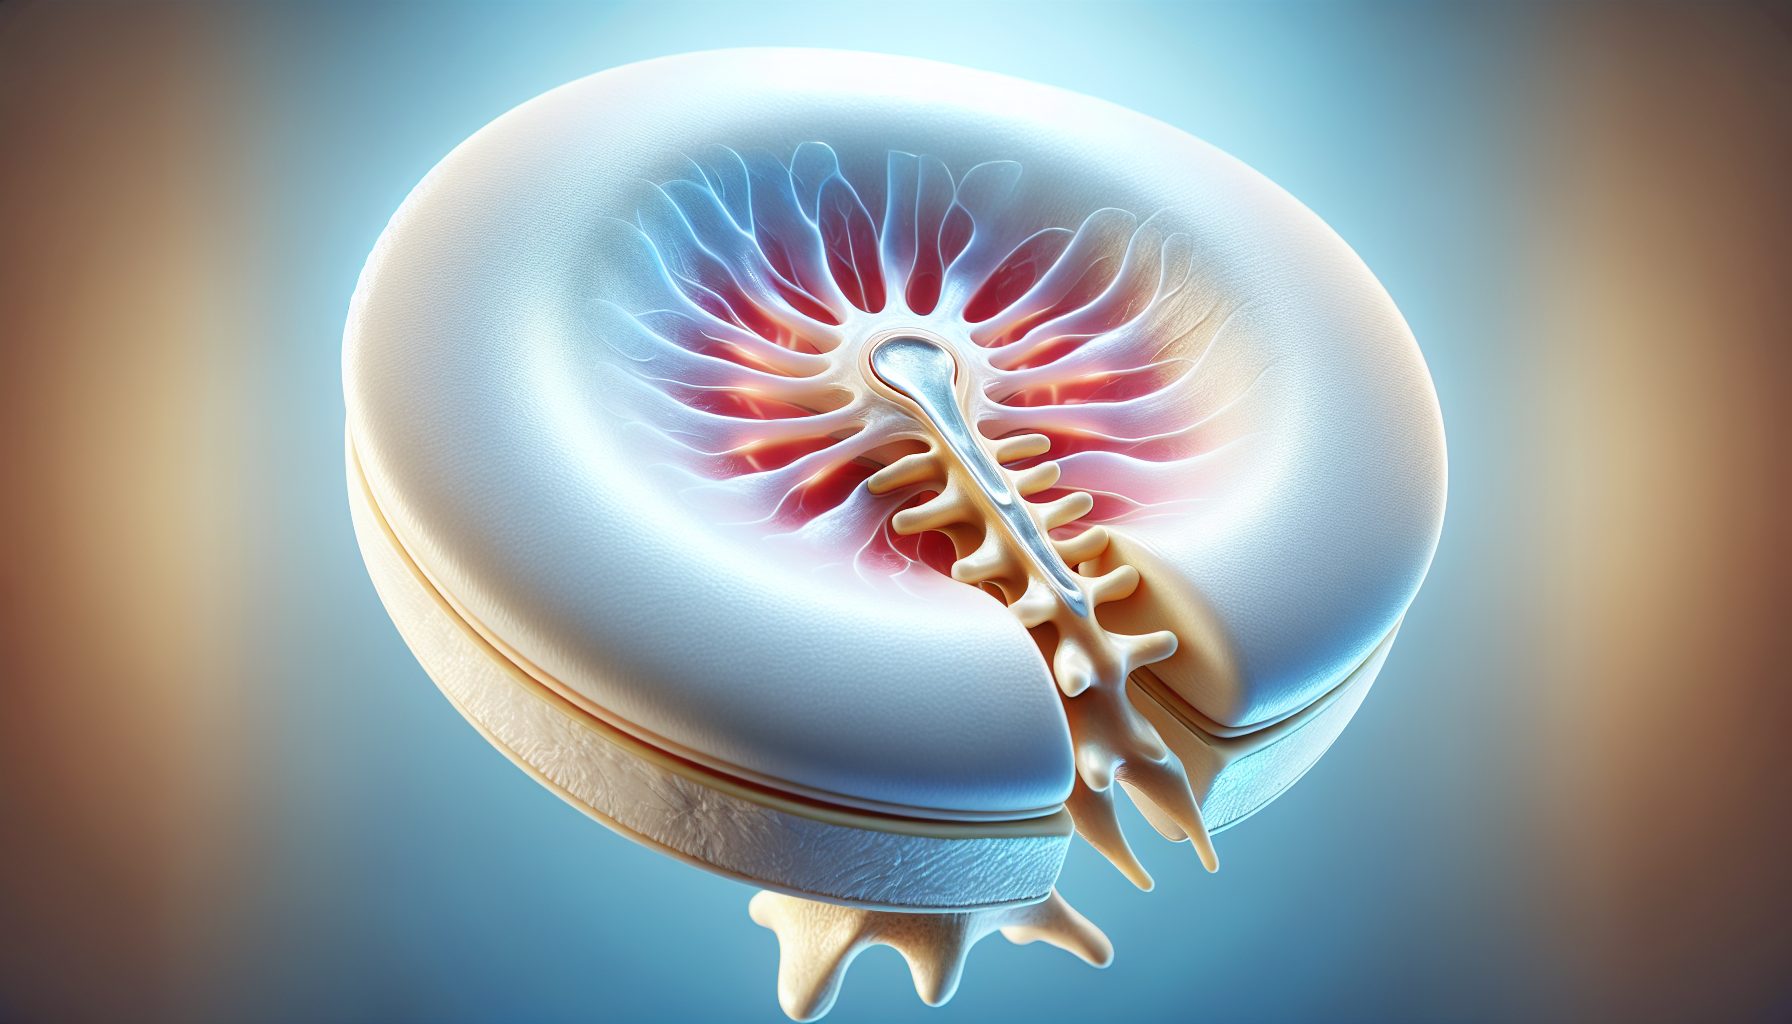 Illustration of a spinal disc with a visible tear, representing a herniated disc